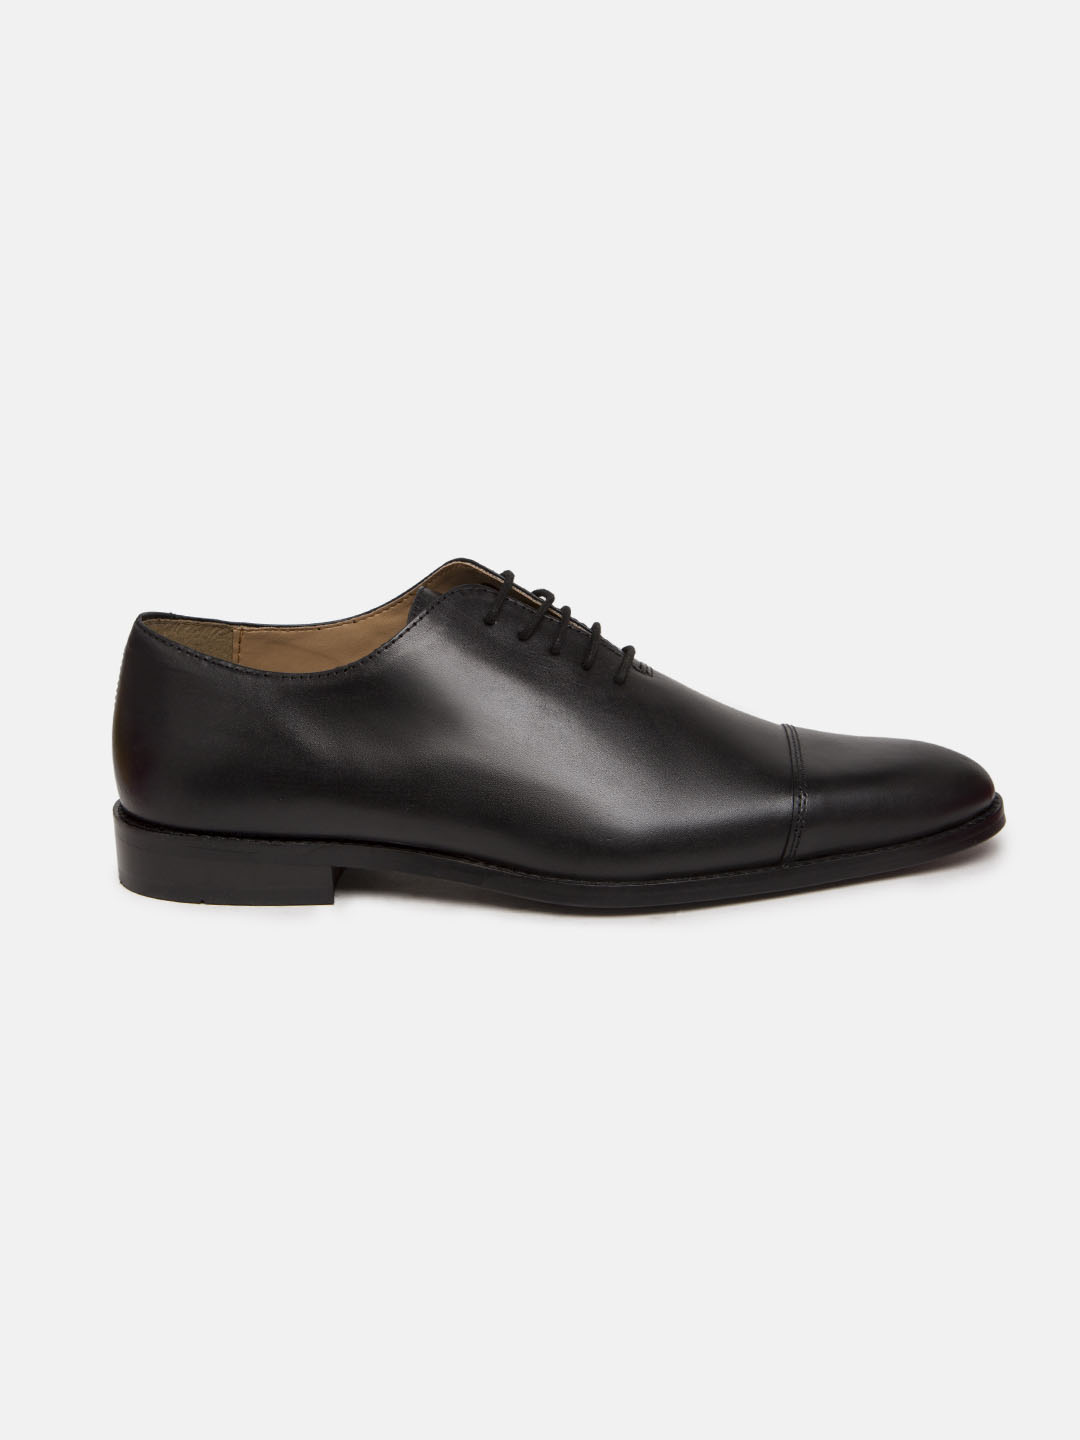 Buy Genuine Leather Black Oxford Shoes for Men's